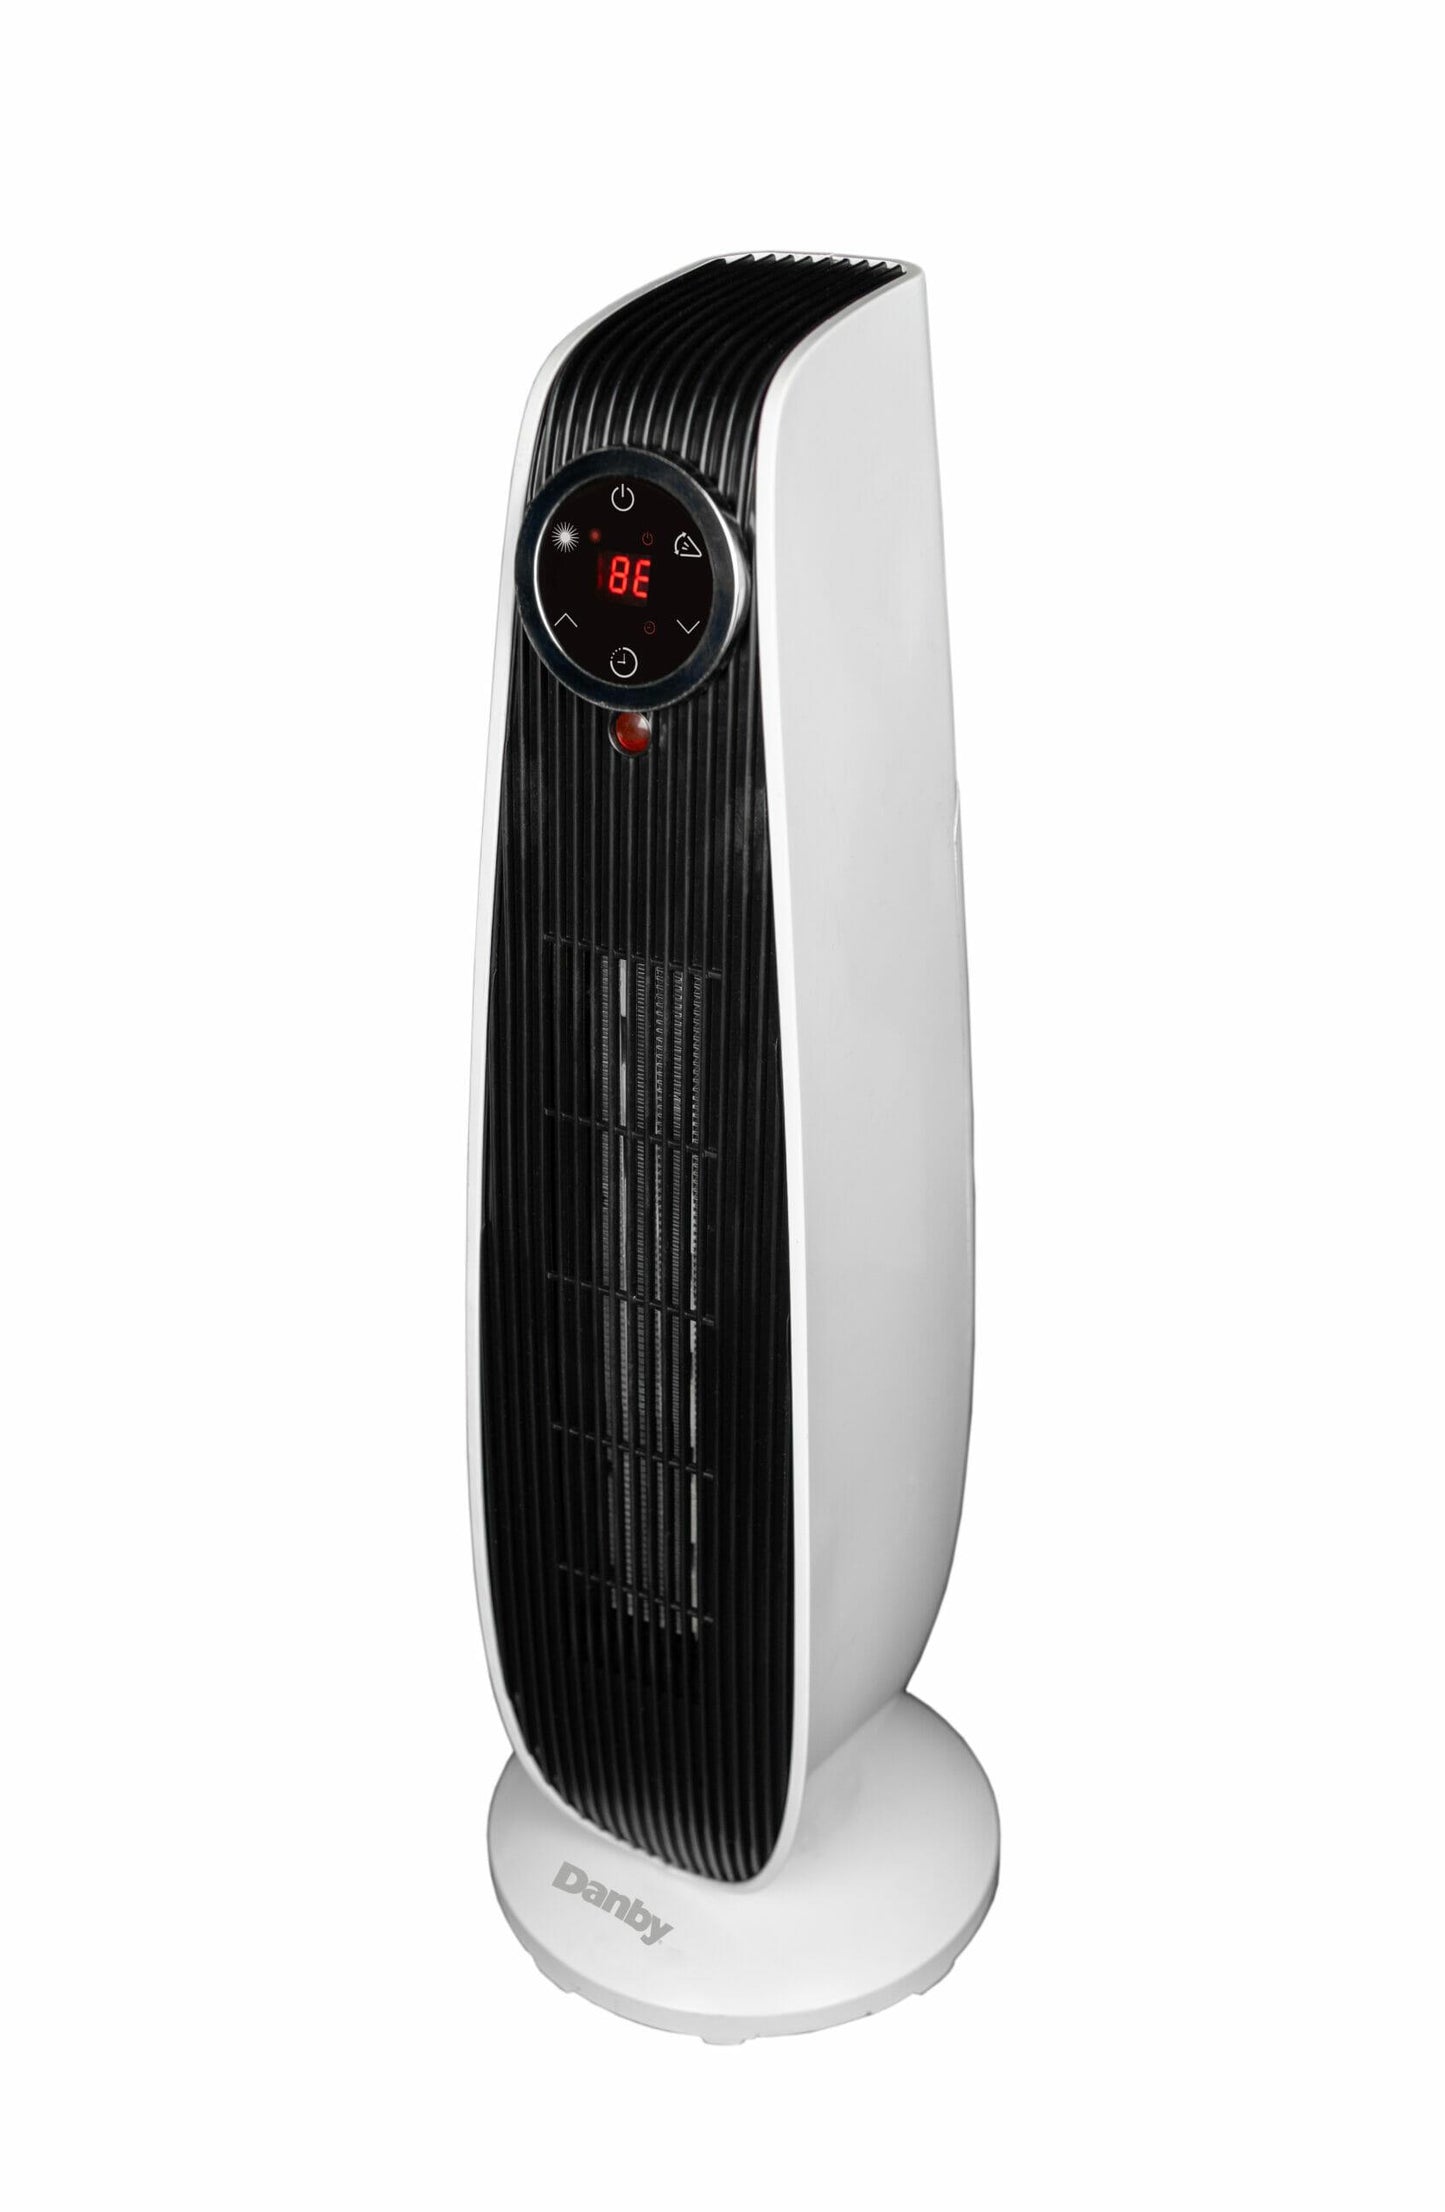 Danby DBSH02213WD13 Danby 1500W Adjustable Oscillating Heater 22" In White